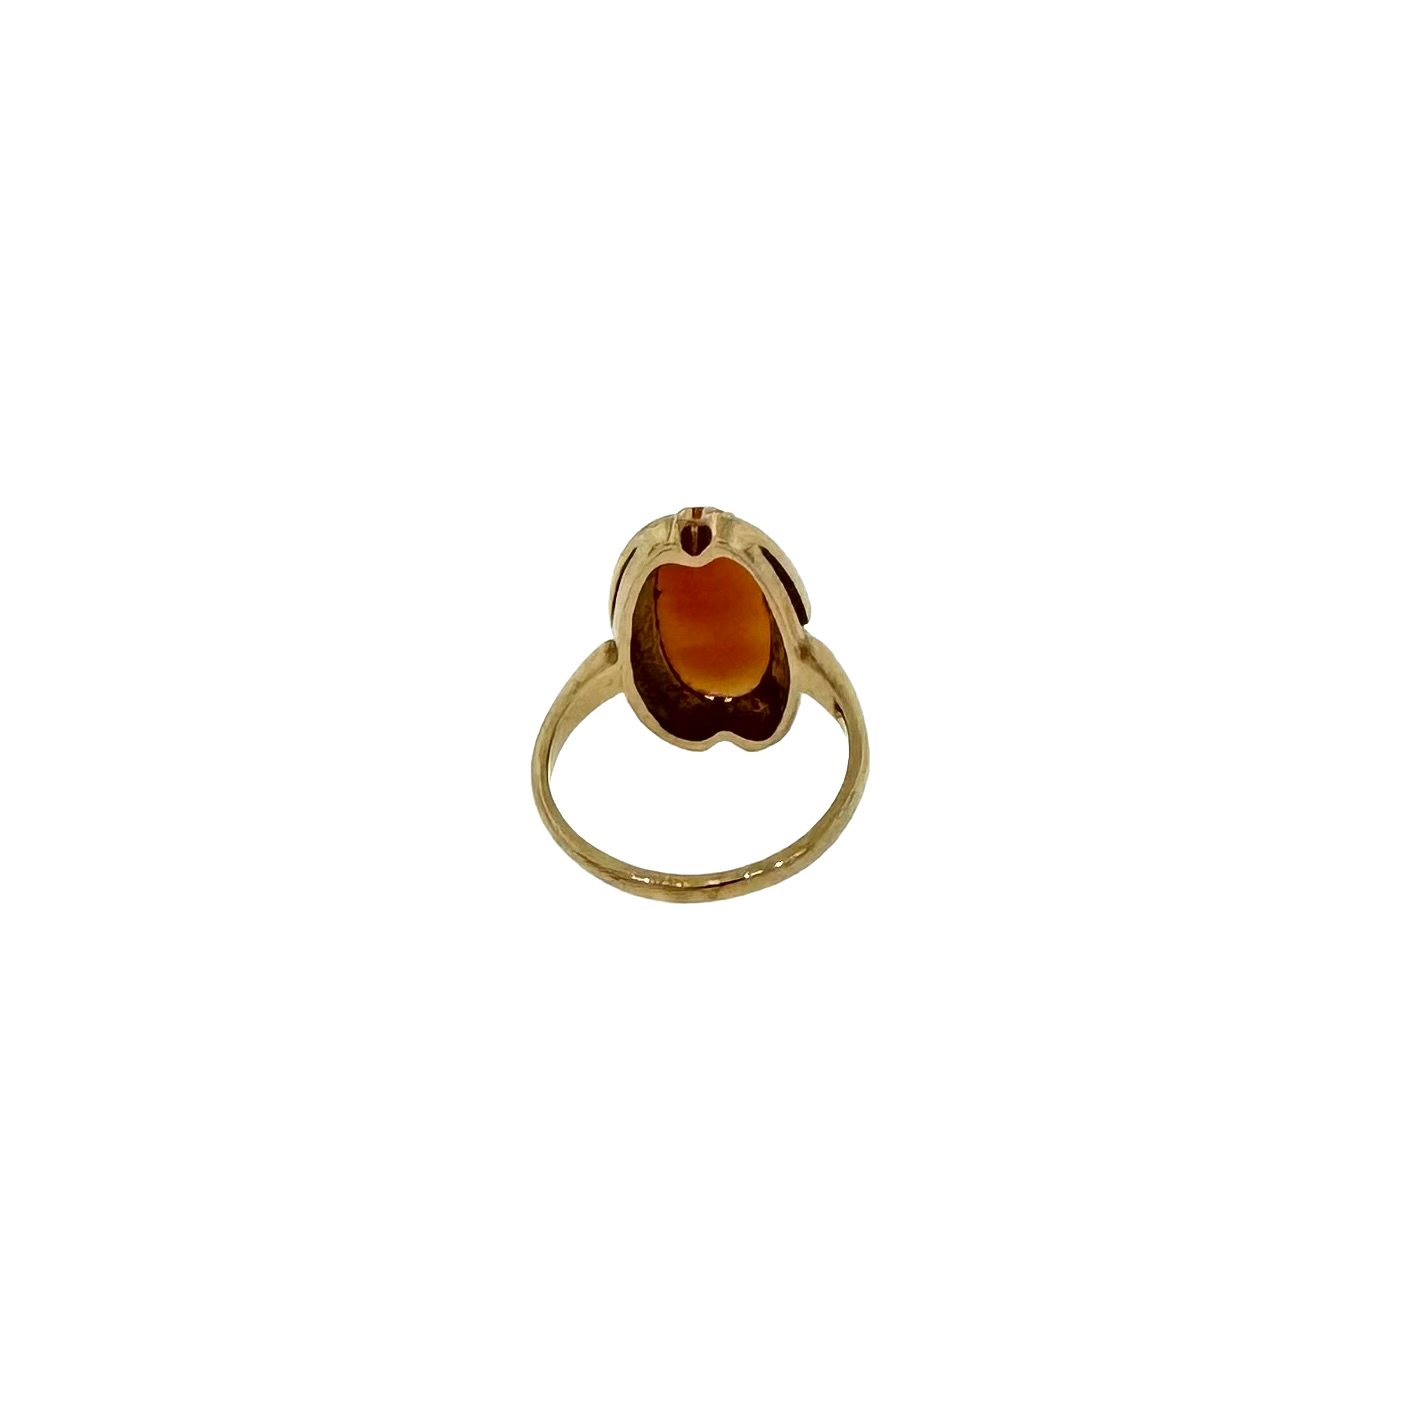 Estate 10k + Elongated Oval Shell Cameo Ring